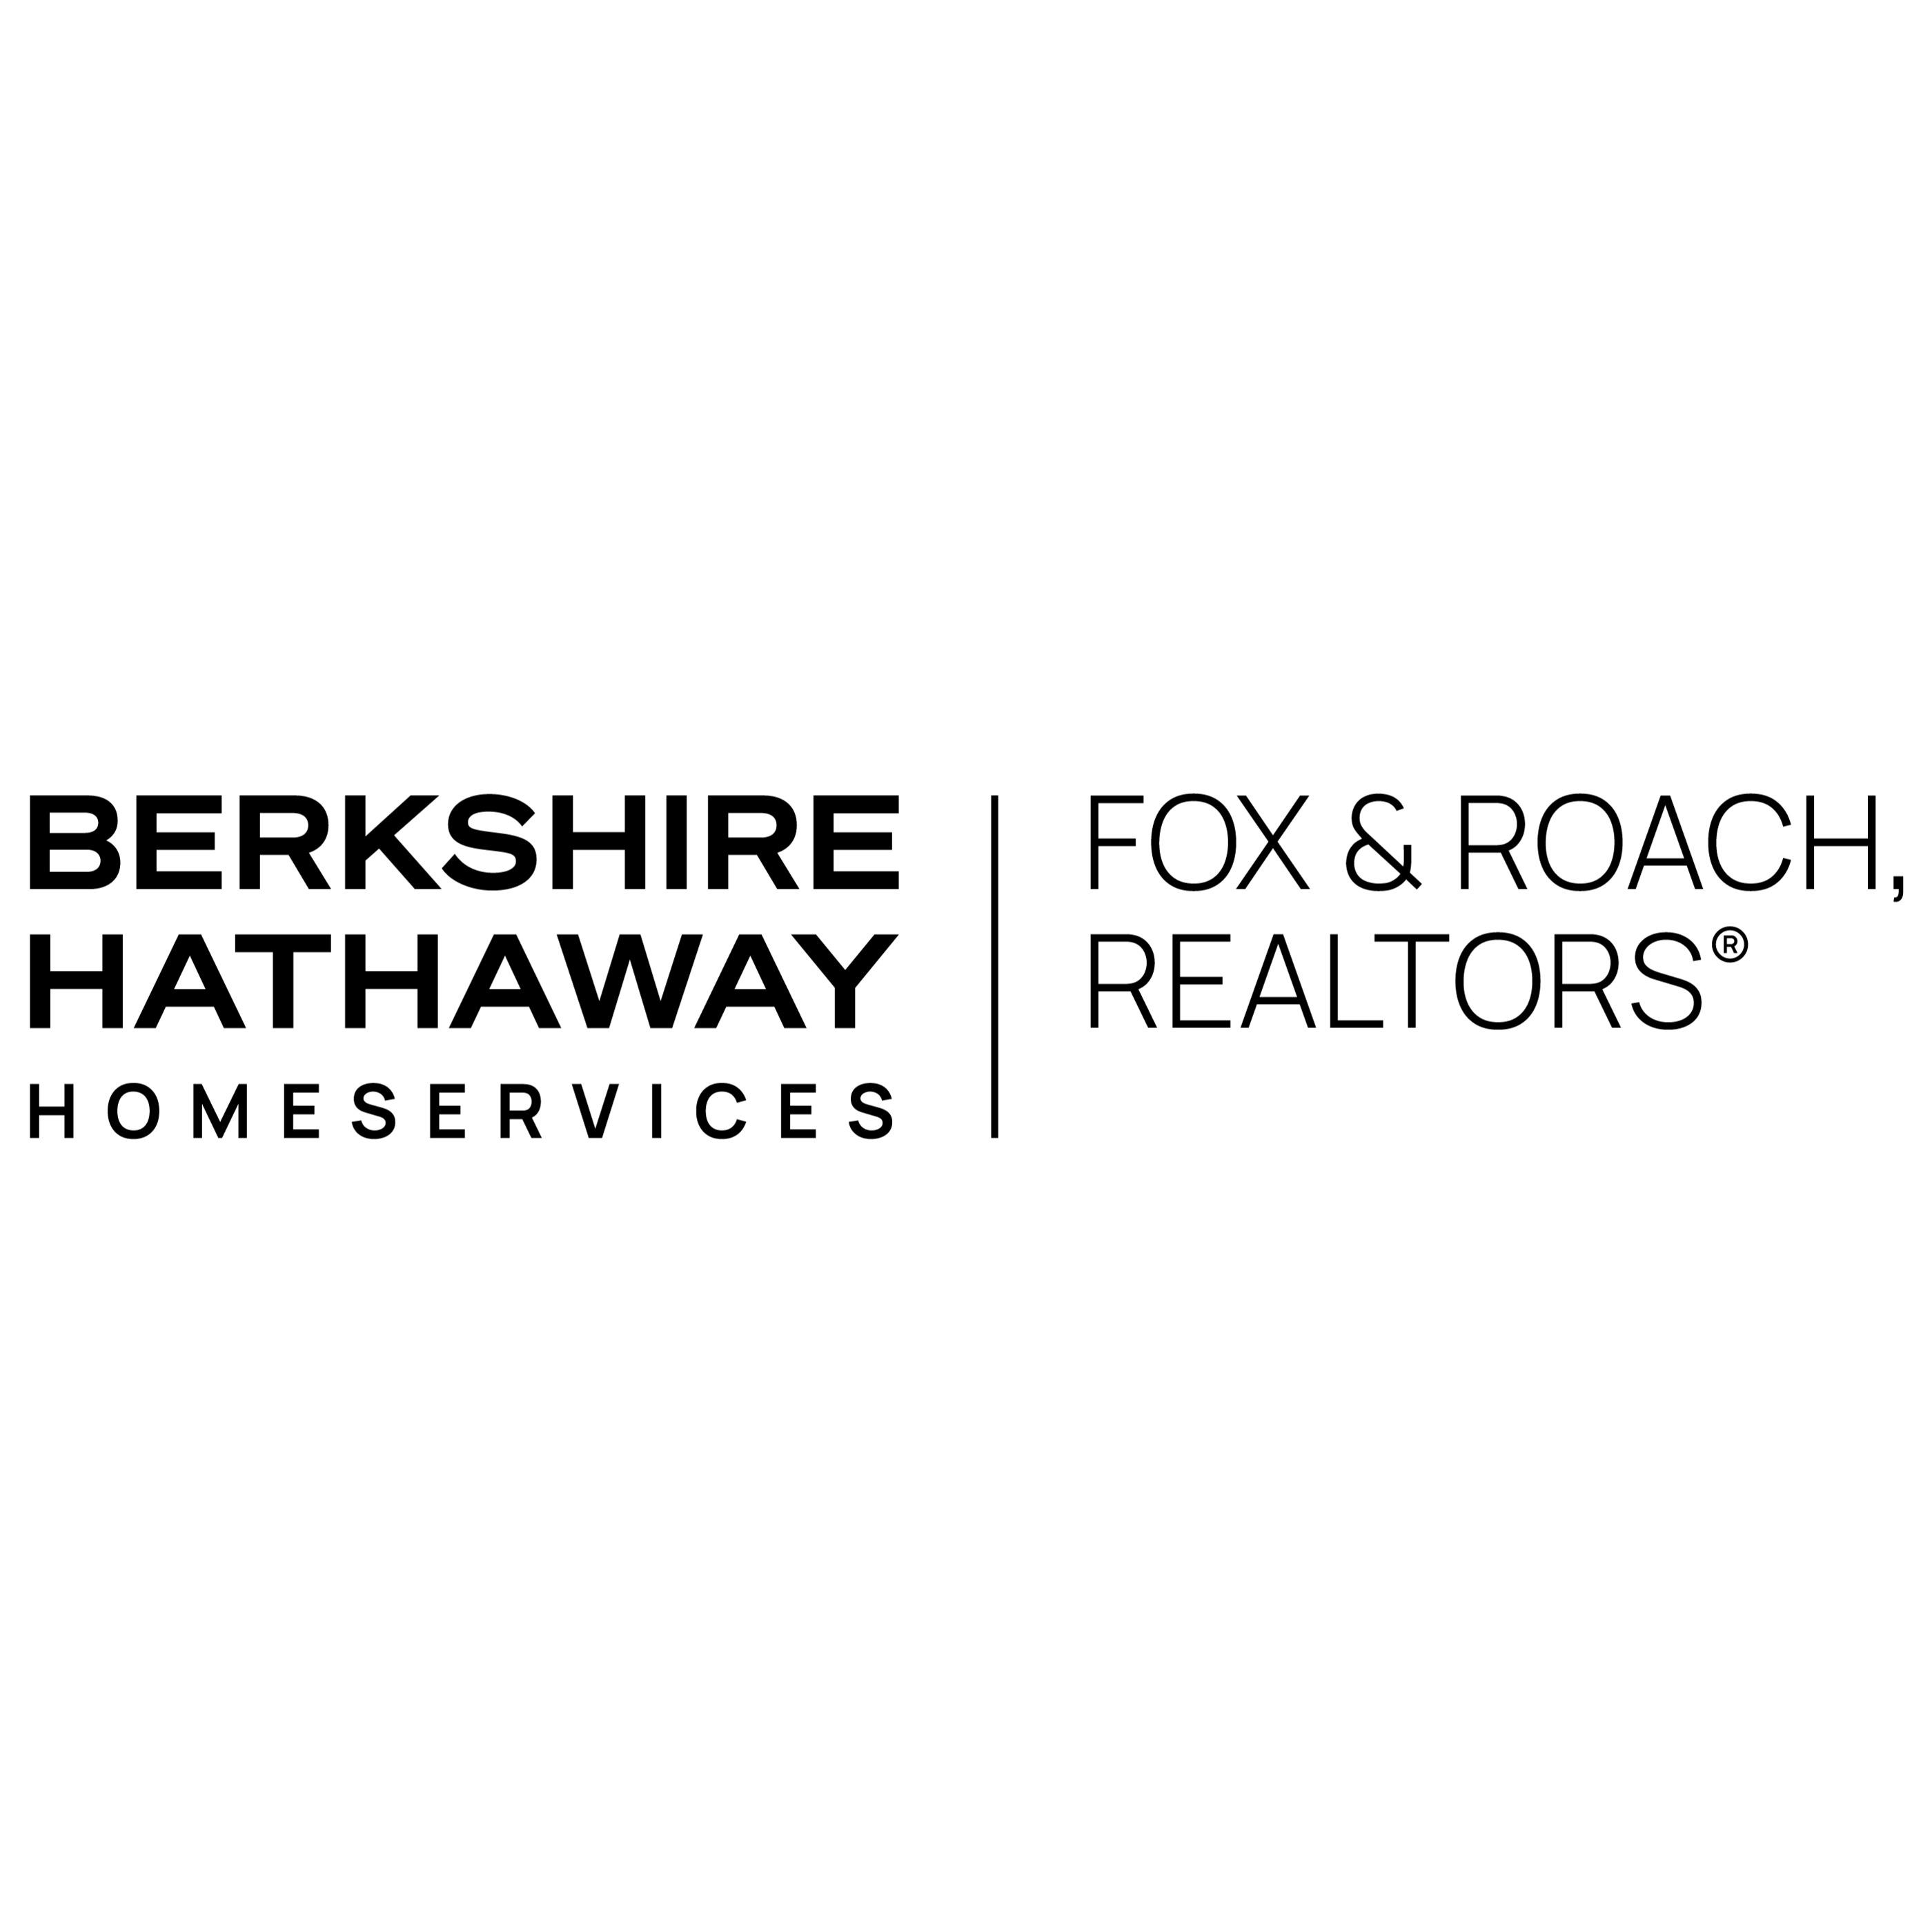 Berkshire Hathaway HomeServices Fox & Roach - Chadds Ford